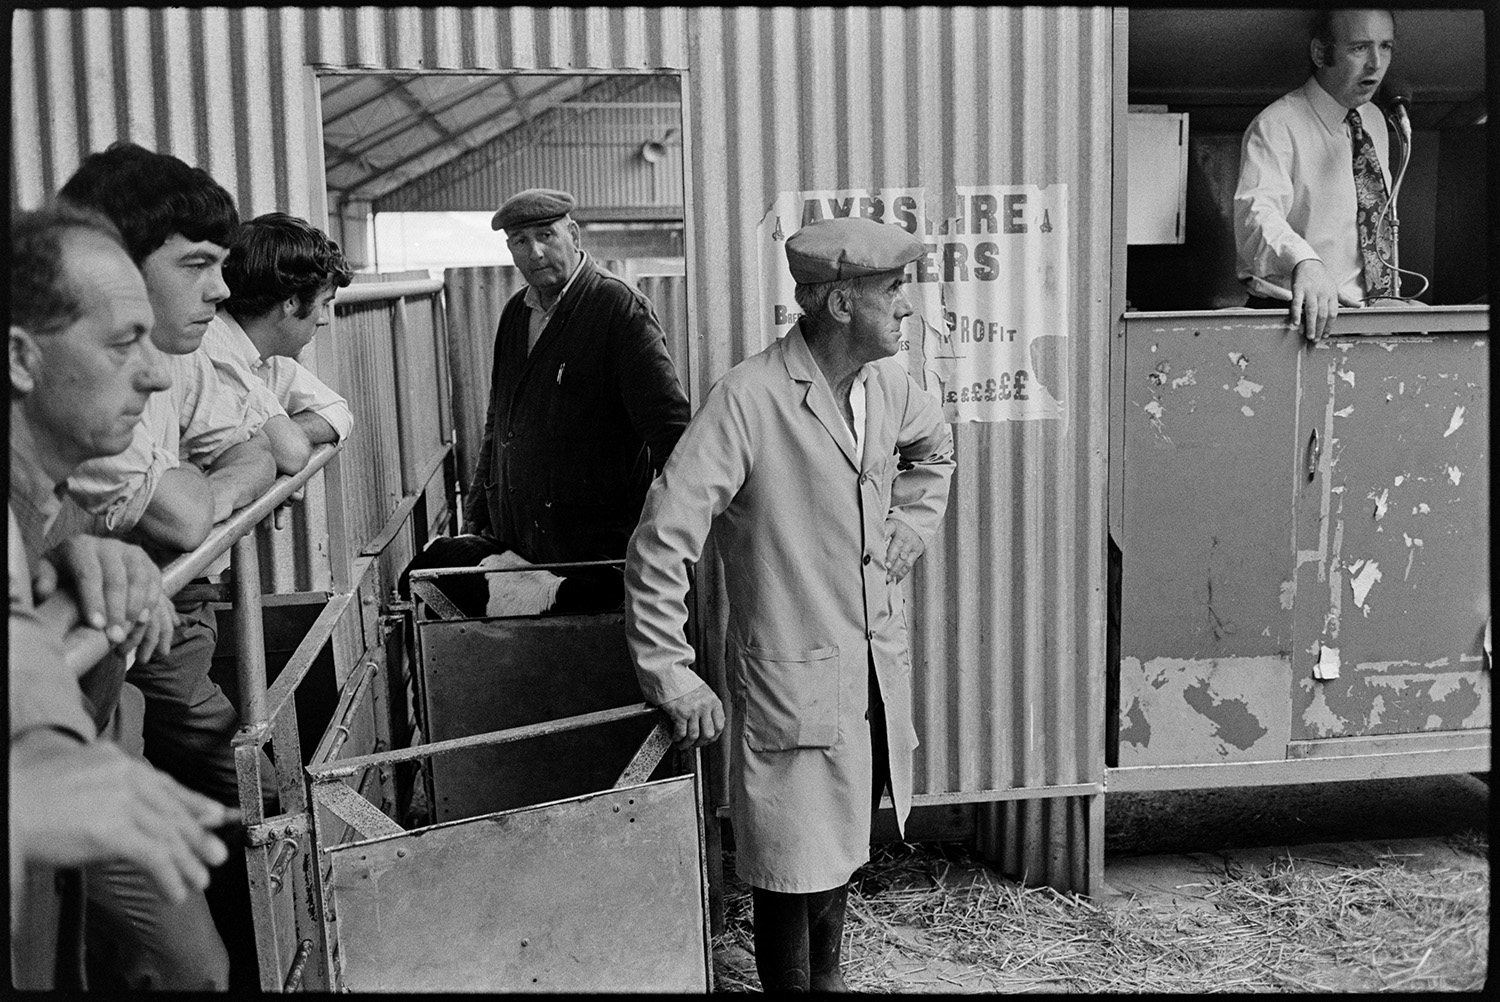 Calves being auctioned at market, Auctioneer. 
[Graham ward and David Ward watching calves enter the ring to be auctioned at Hatherleigh Market. The auctioneer is speaking into a microphone from a kiosk by the ring.]